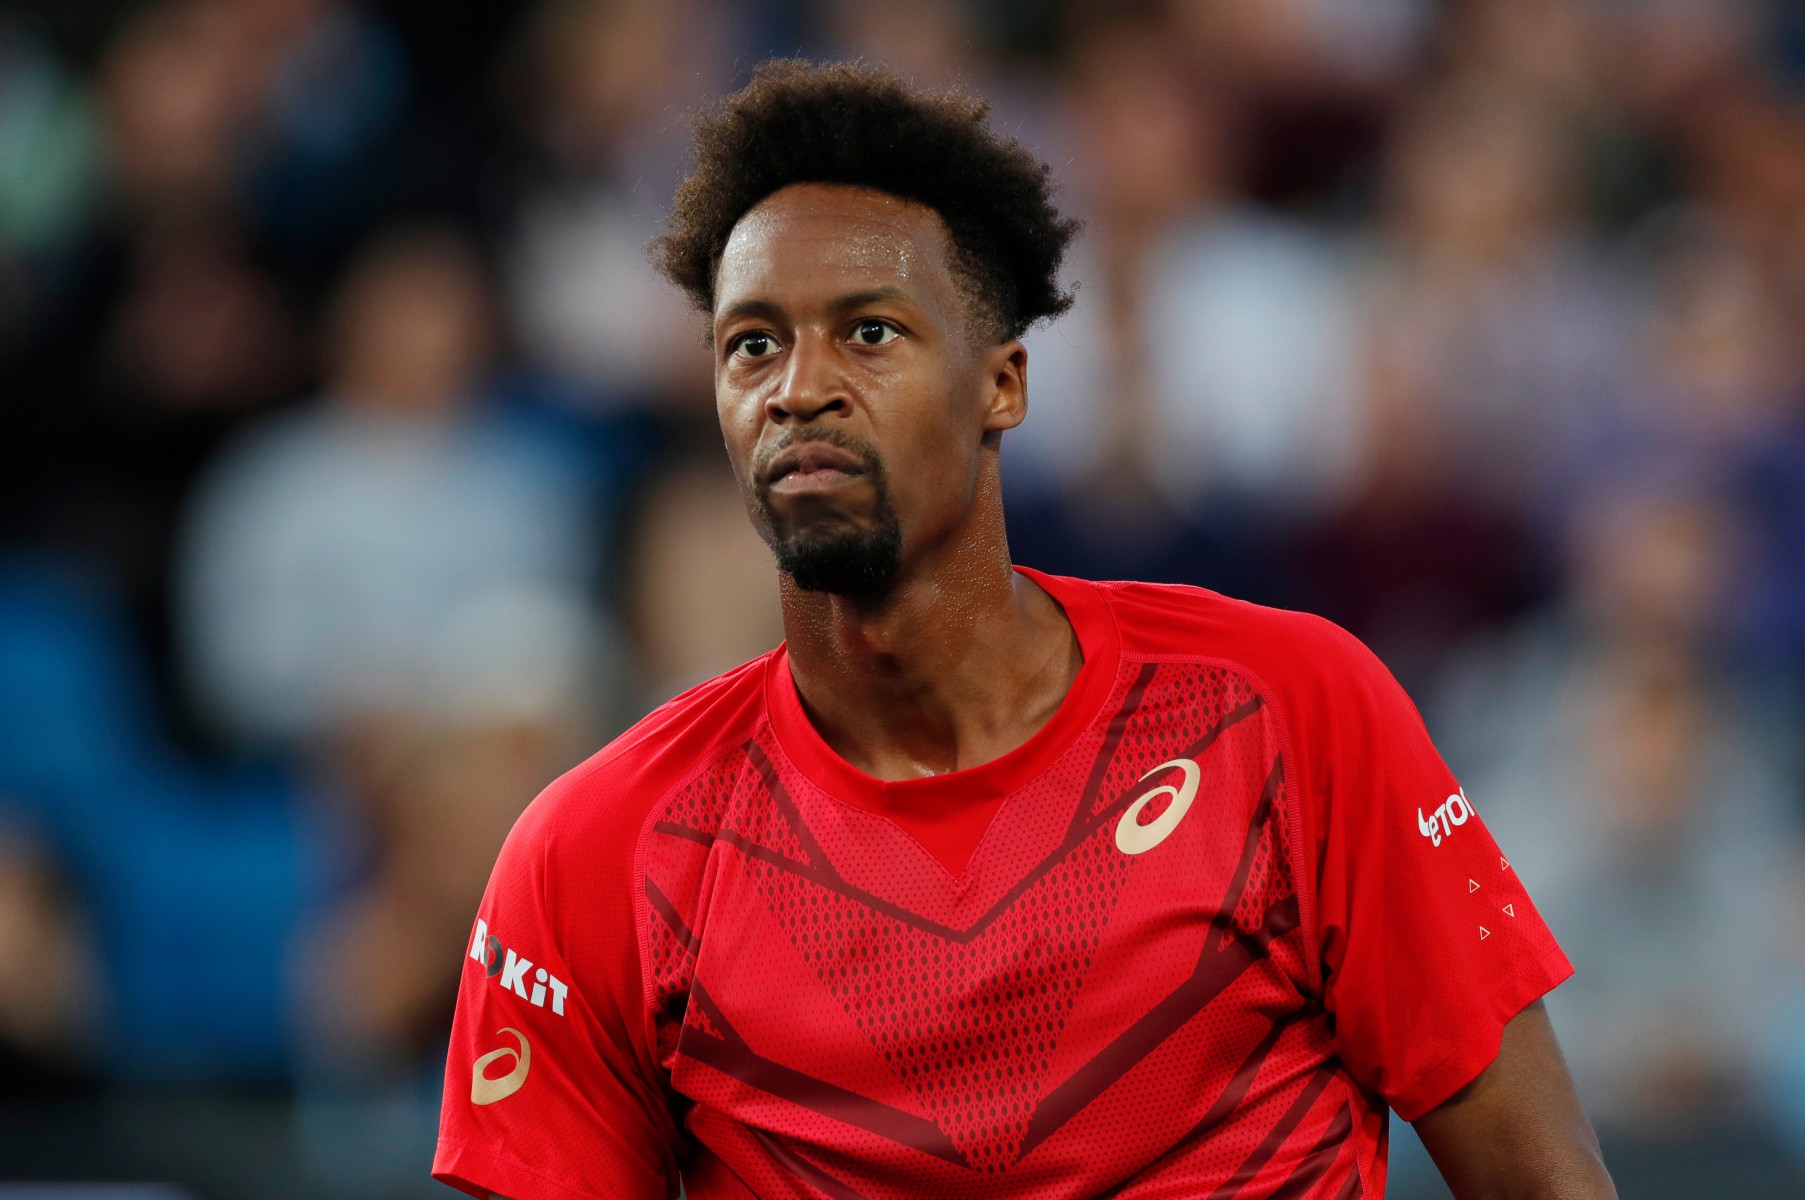 , Gael Monfils admits playing too much PlayStation is behind hand injury as video games hit Australian Open hopes